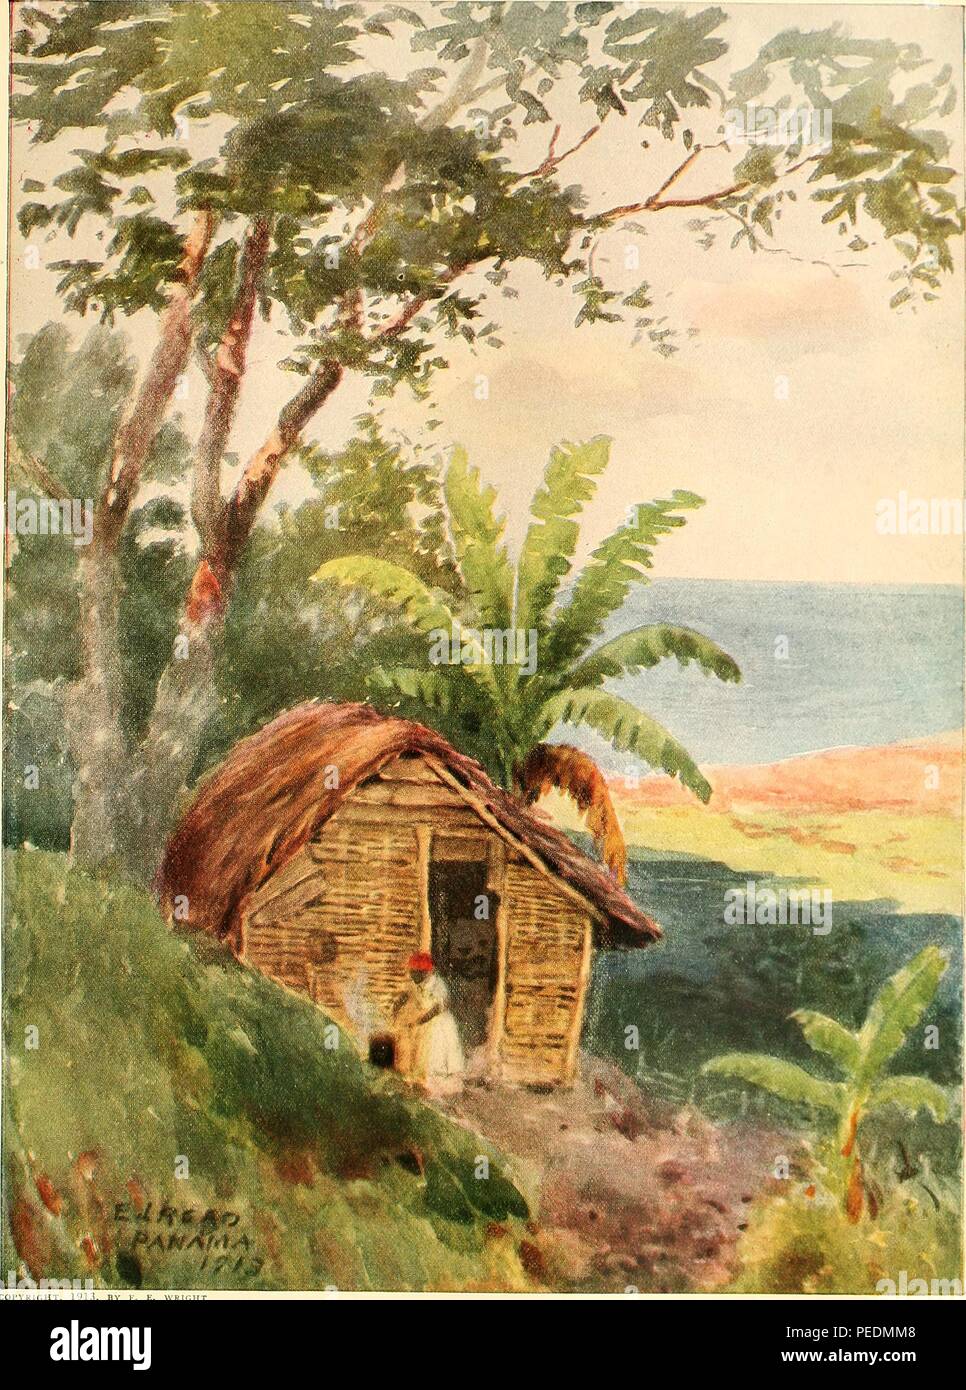 Color illustration depicting a small, Panamanian house or wooden hut, with a palm leaf roof, a woman cooking in front of the door, tropical foliage in the foreground and background, and the ocean at right midground, signed by EI Read, 1913. Courtesy Internet Archive. () Stock Photo